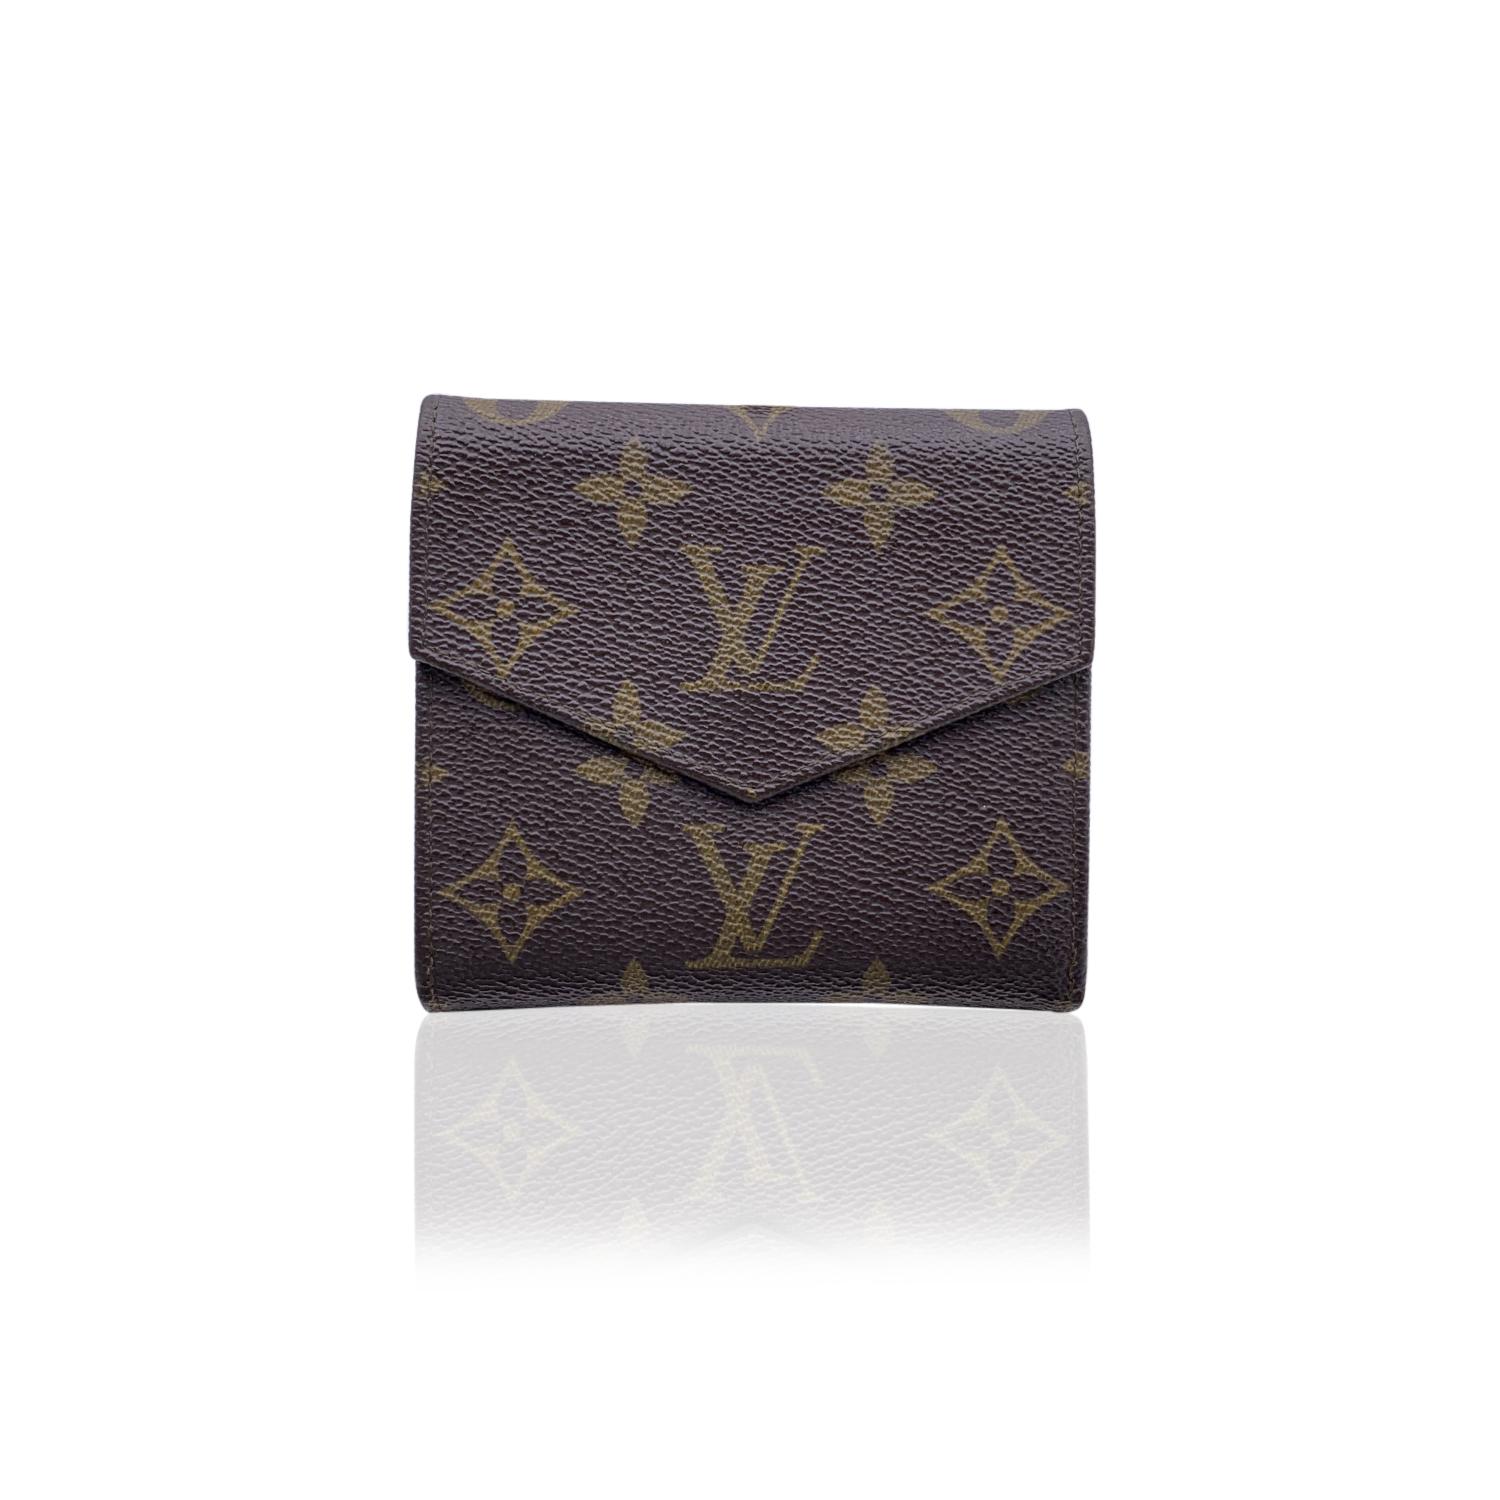 Louis Vuitton Vintage square-shaped wallet with double side flap. Crafted in brown monogram canvas. Tan leather lining. 1 flap coin compartment on a side and a trifold section on the other side, with 2 bill compartments. 'Louis Vuitton Paris - Made